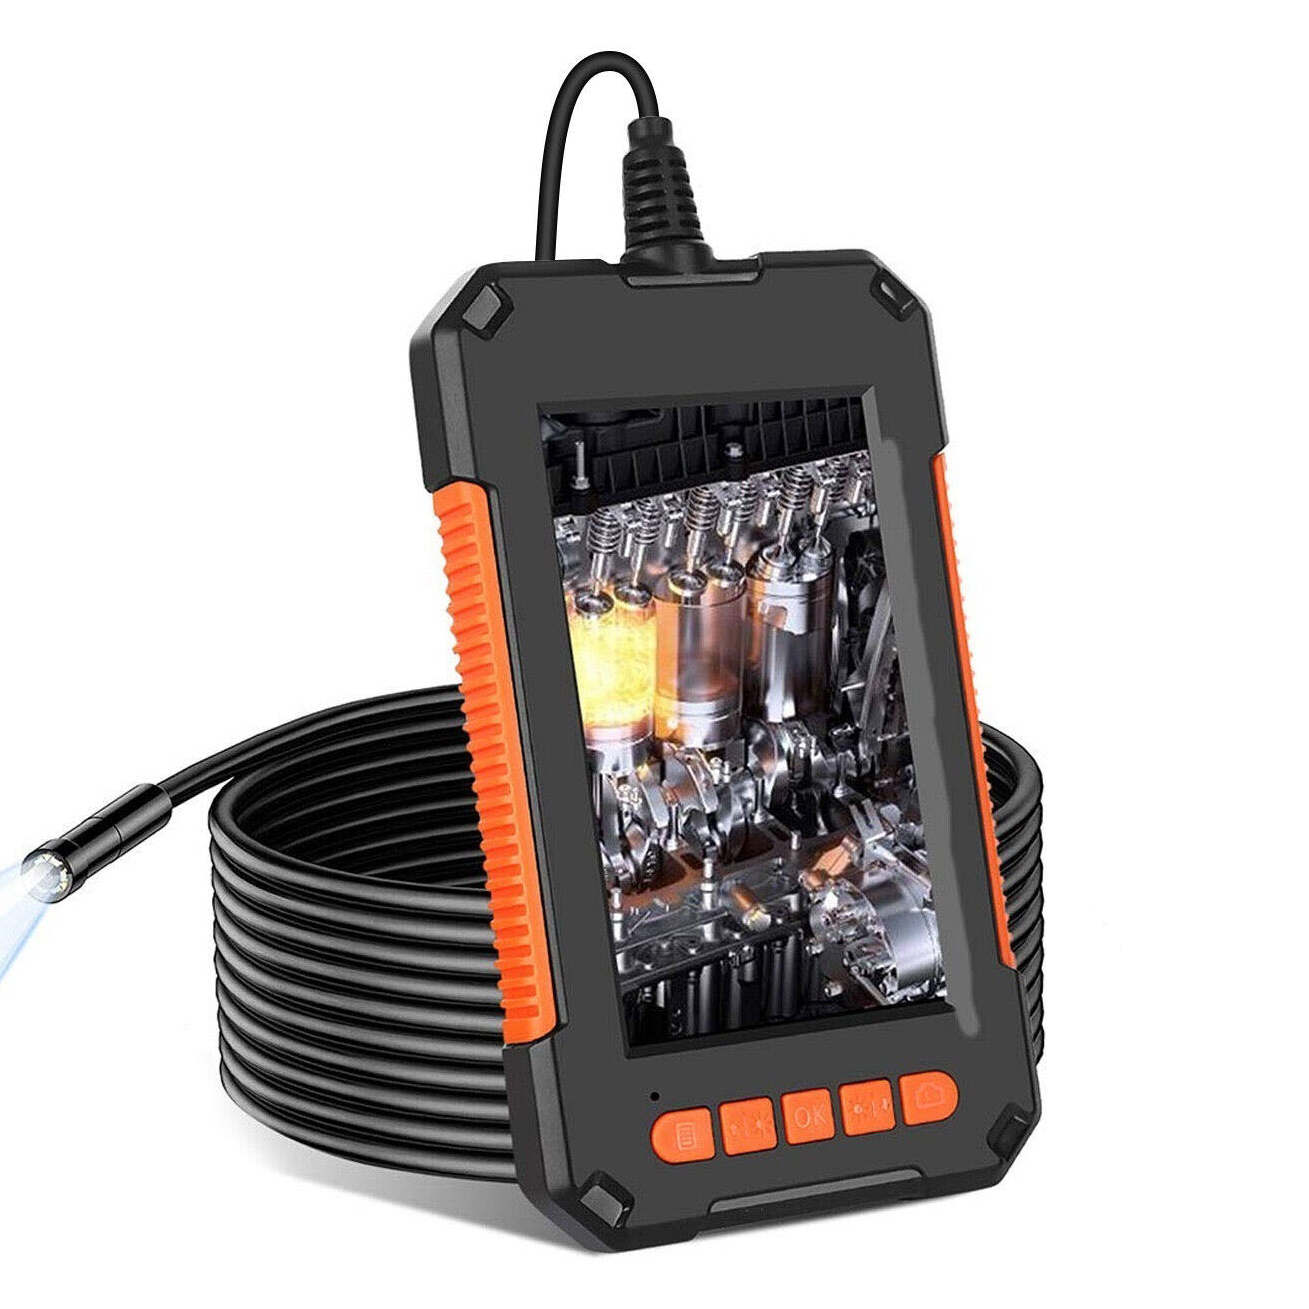 8mm 1080P HD Industrial Endoscope 2 Million Hand-held Portable Pipeline Borescope Camera Inspection Tool 2M